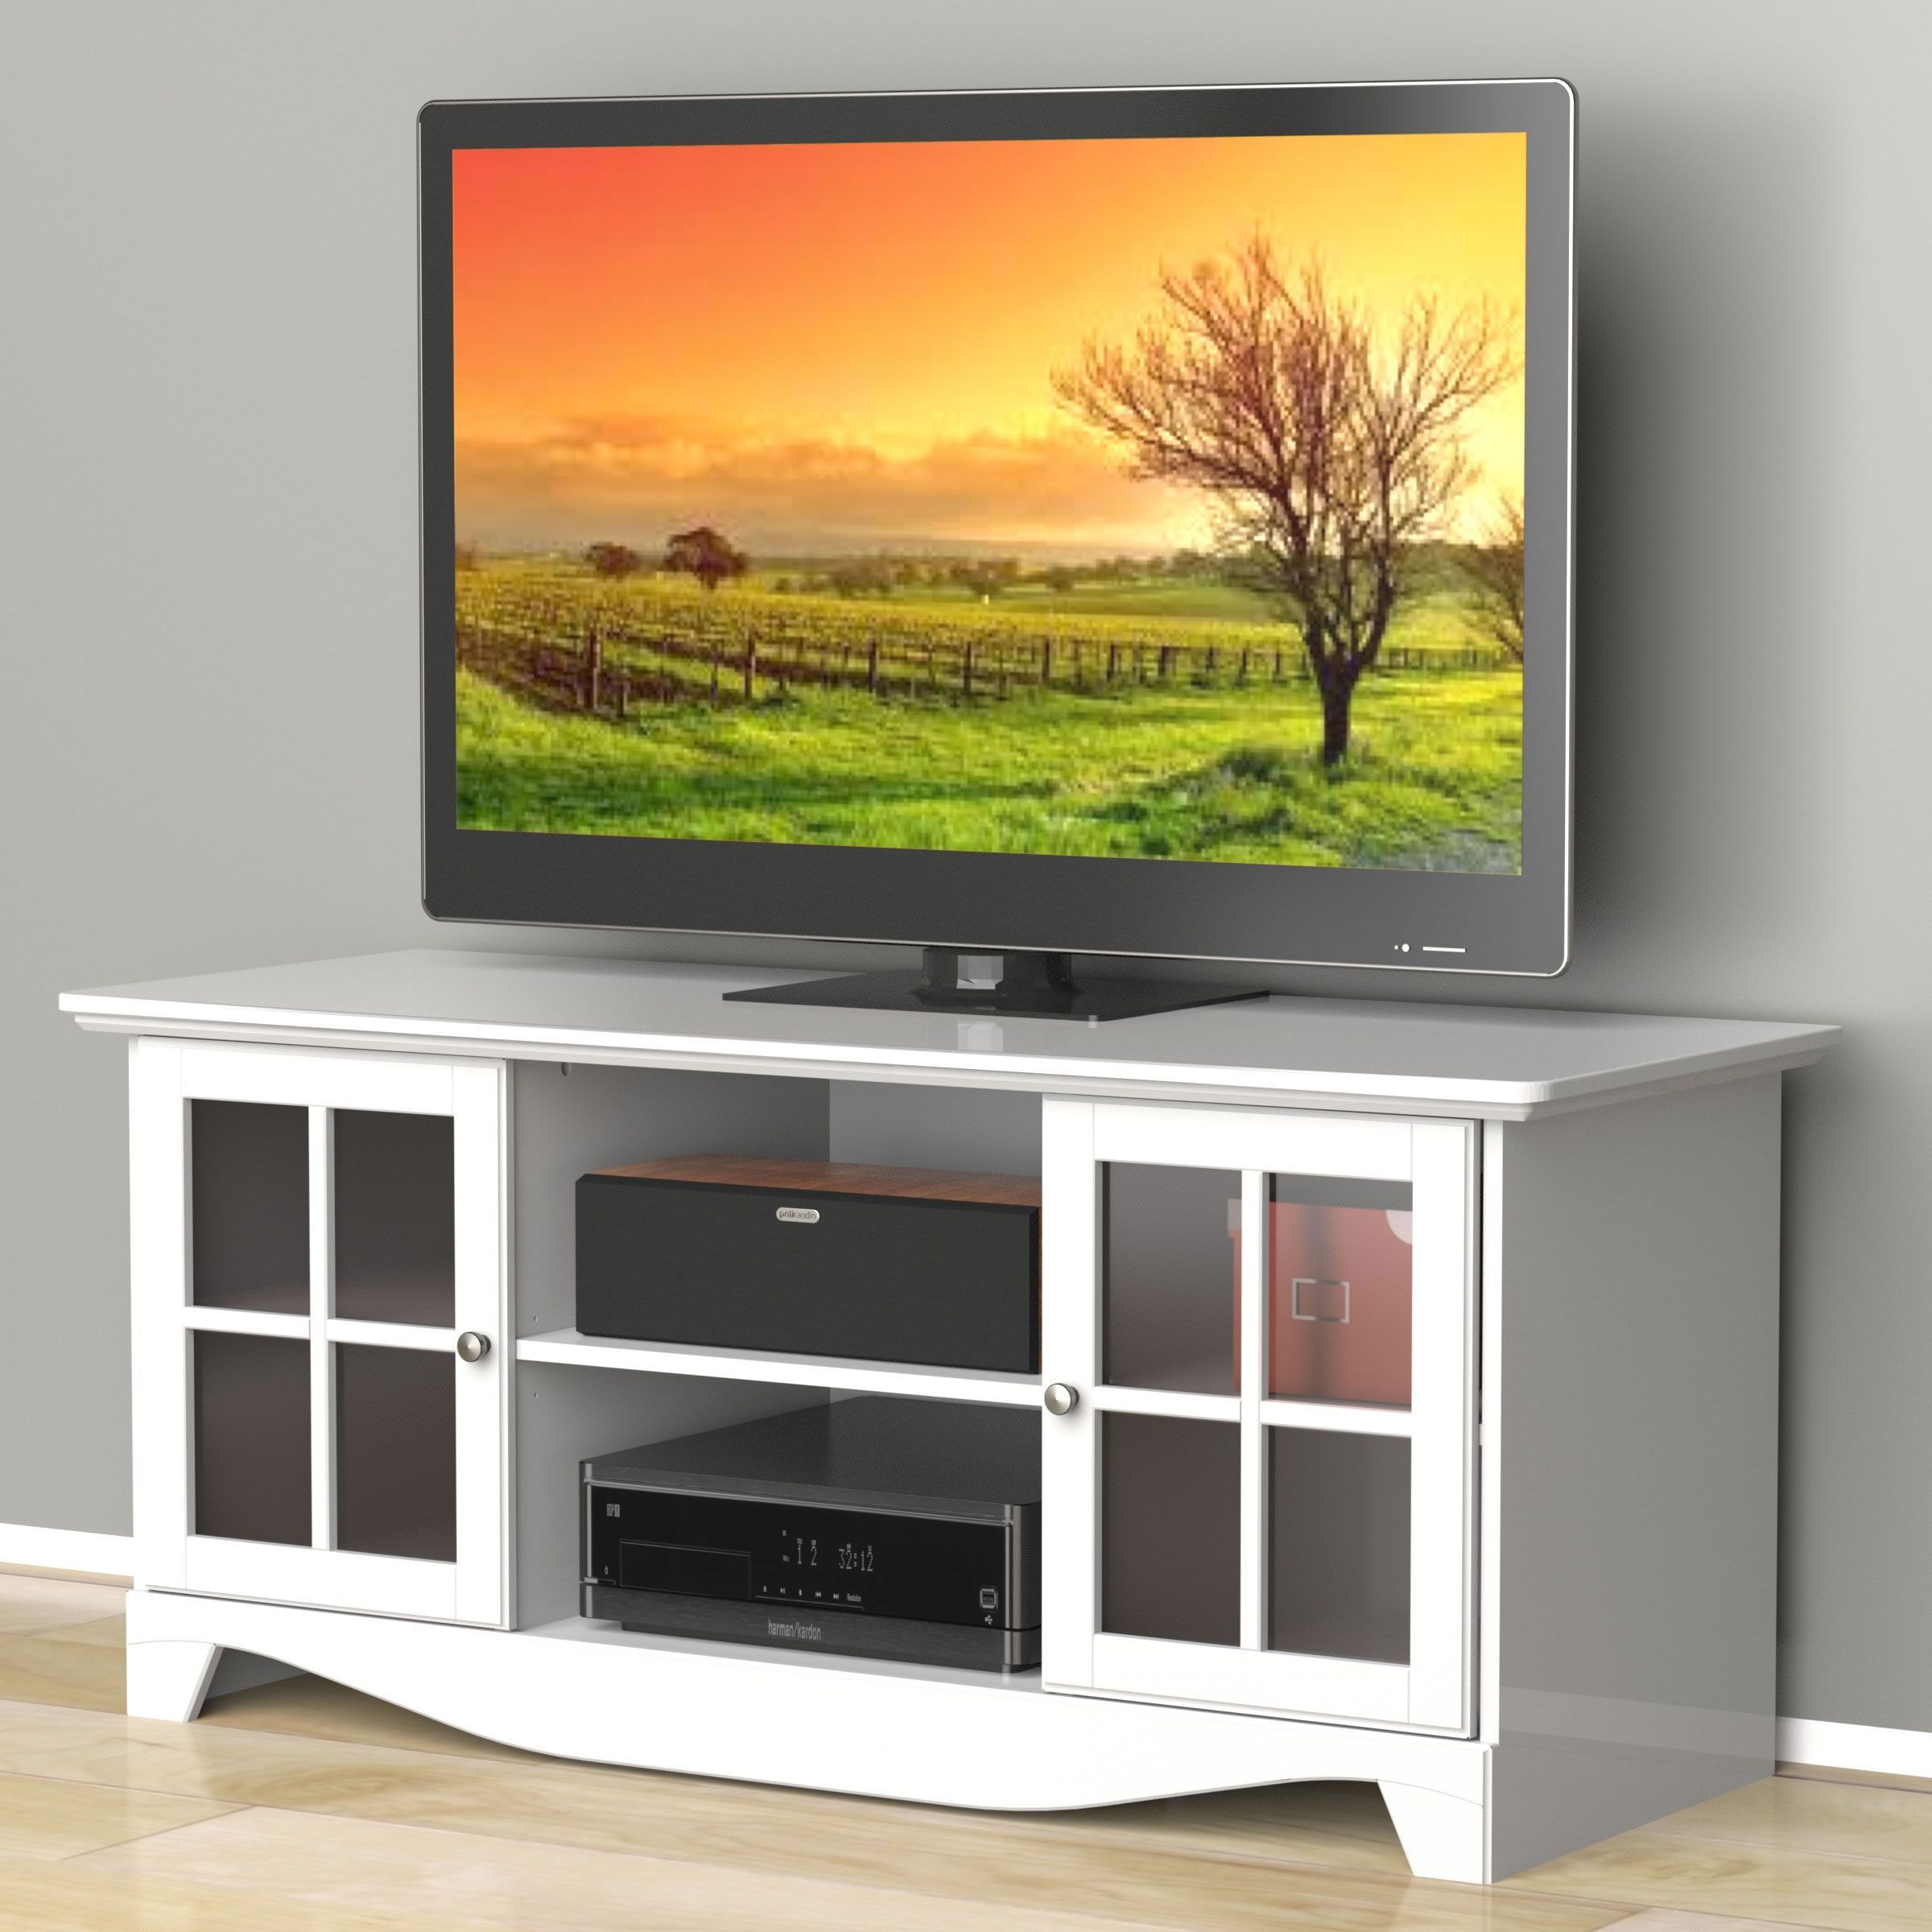 Nexera Pinnacle 56 Inch Tv Stand (white) – Nx 101203 For White Wooden Tv Stands (View 11 of 15)